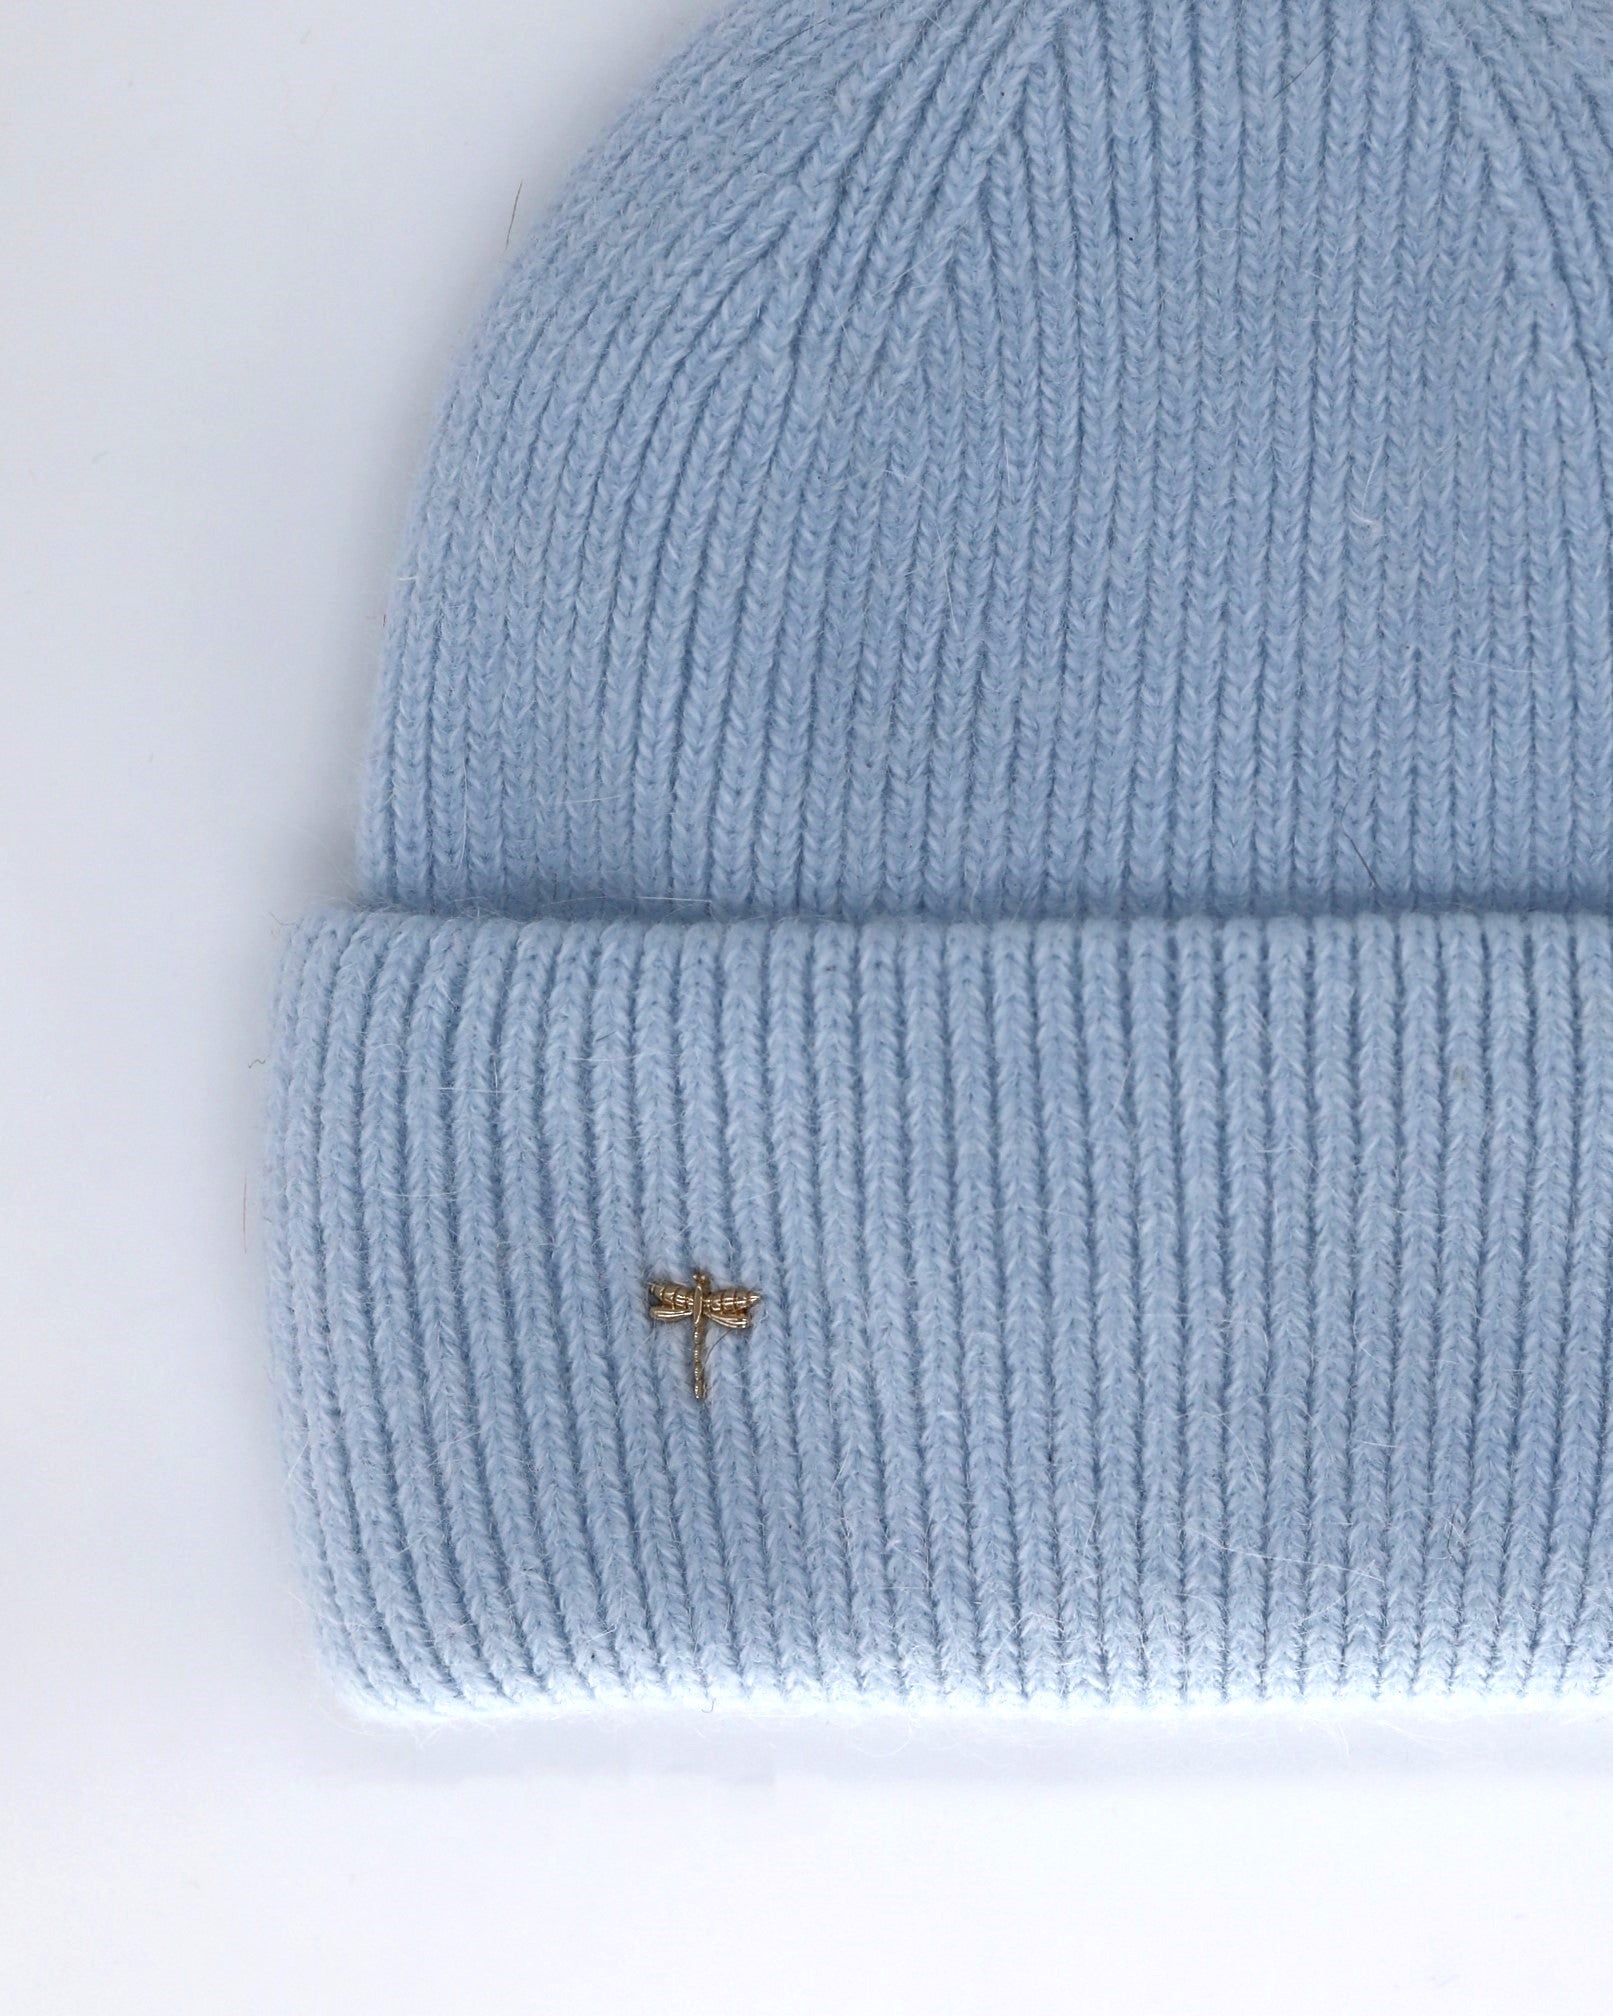 This Hat is a finest hat with a classic silhouette from Villanelle. A luxurious accessory for women made from the softest natural angora and sheep wool for extreme comfort and warmth. It is made in a trendy light blue color accompanied by an elegant pin. This product is sourced and manufactured in Poland.